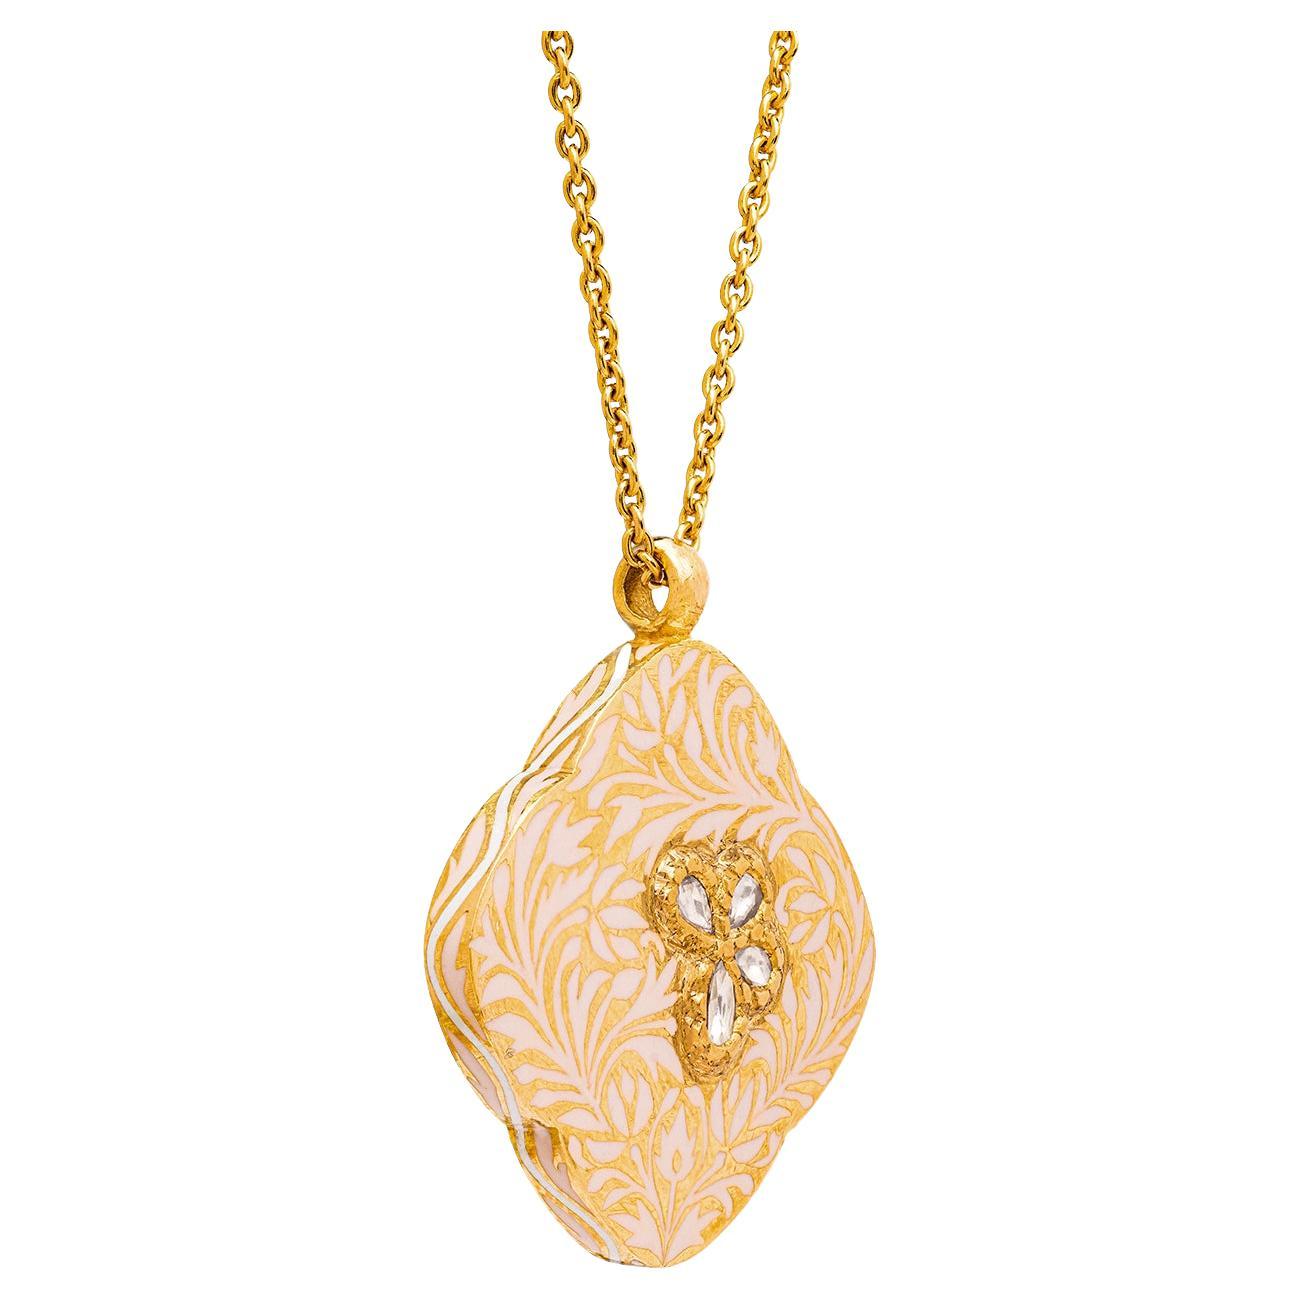 Women's or Men's 22K Gold Rose Cut Diamond and Floral Enamel Pendant Necklace Handmade by Agaro